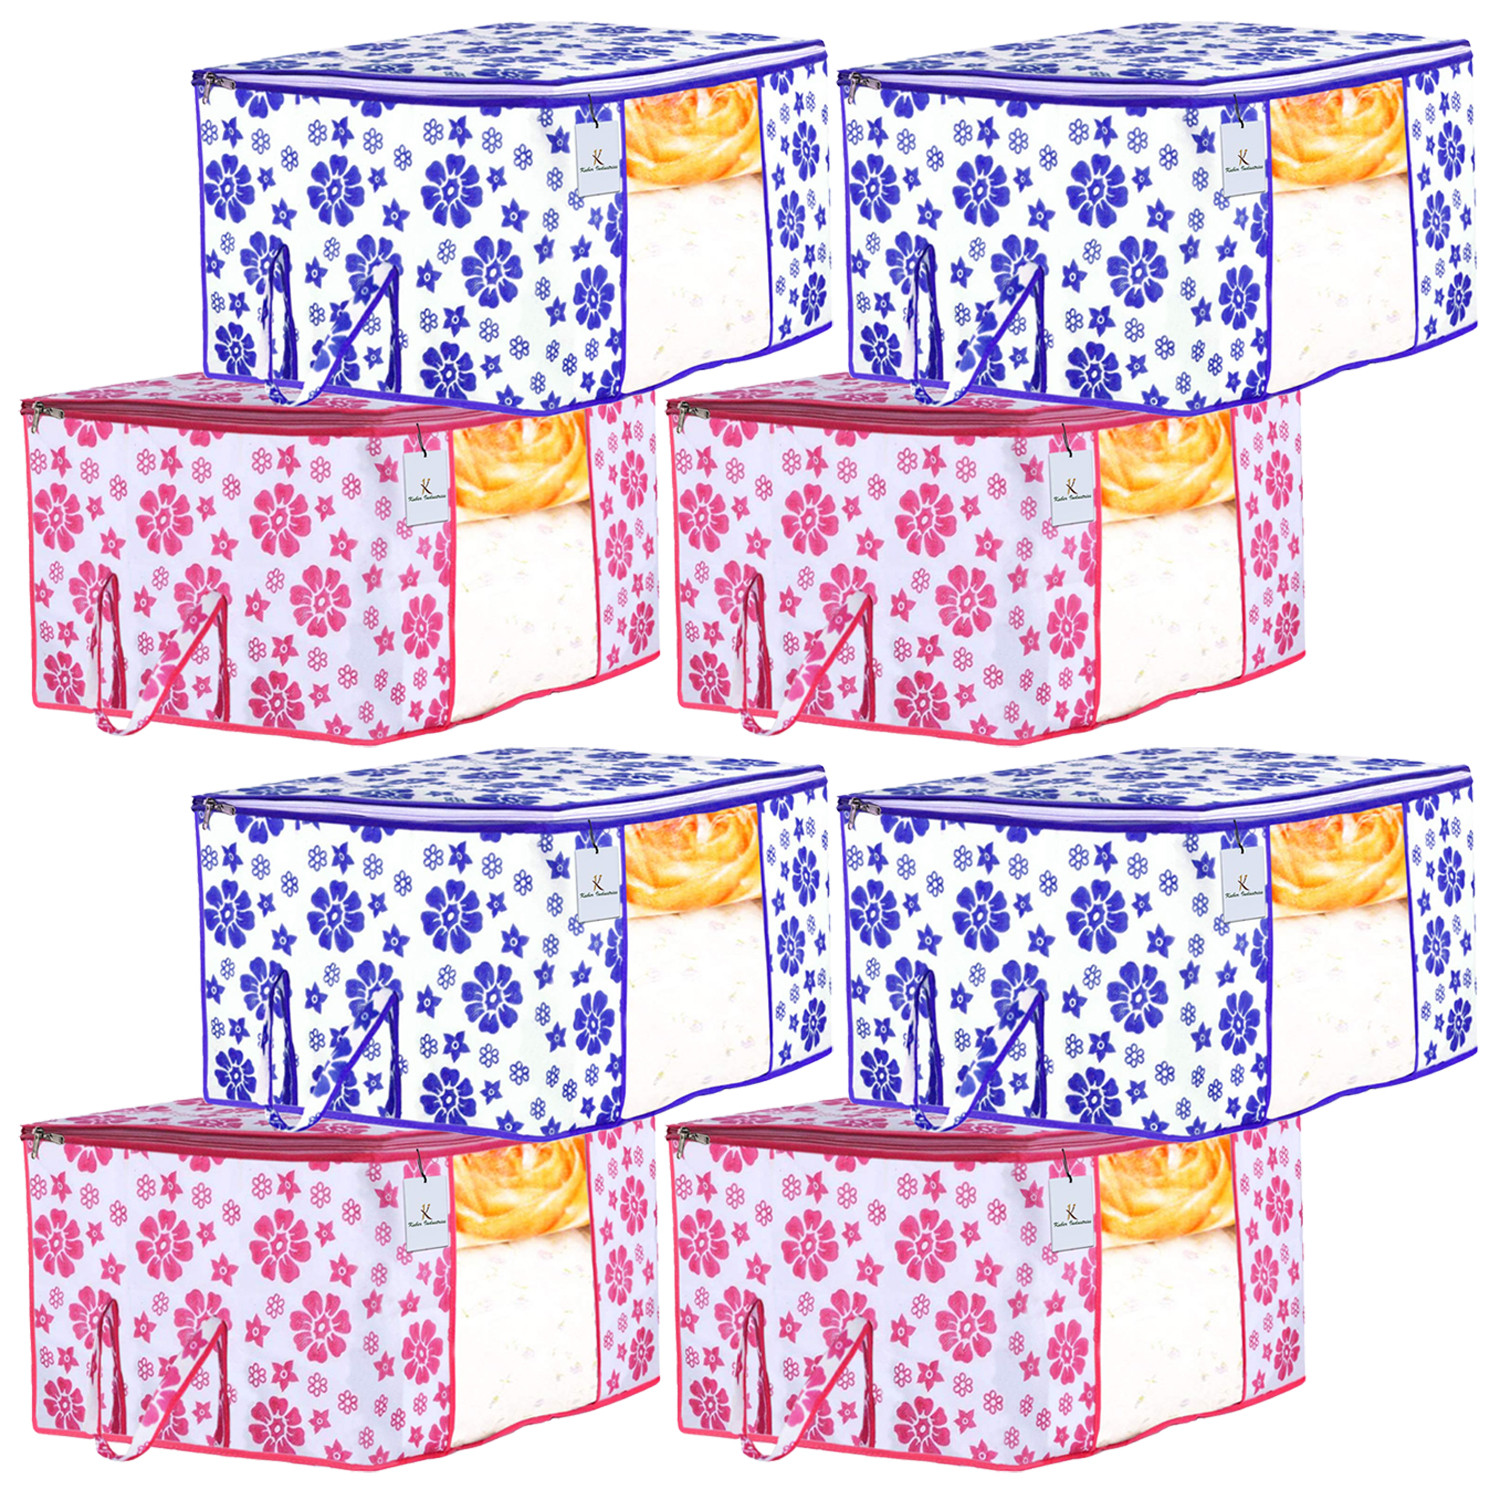 Kuber Industries Flower Design Non Woven Fabric Underbed Storage Bag,Cloth Organiser,Blanket Cover with Transparent Window, Pink & Blue -CTKTC41041